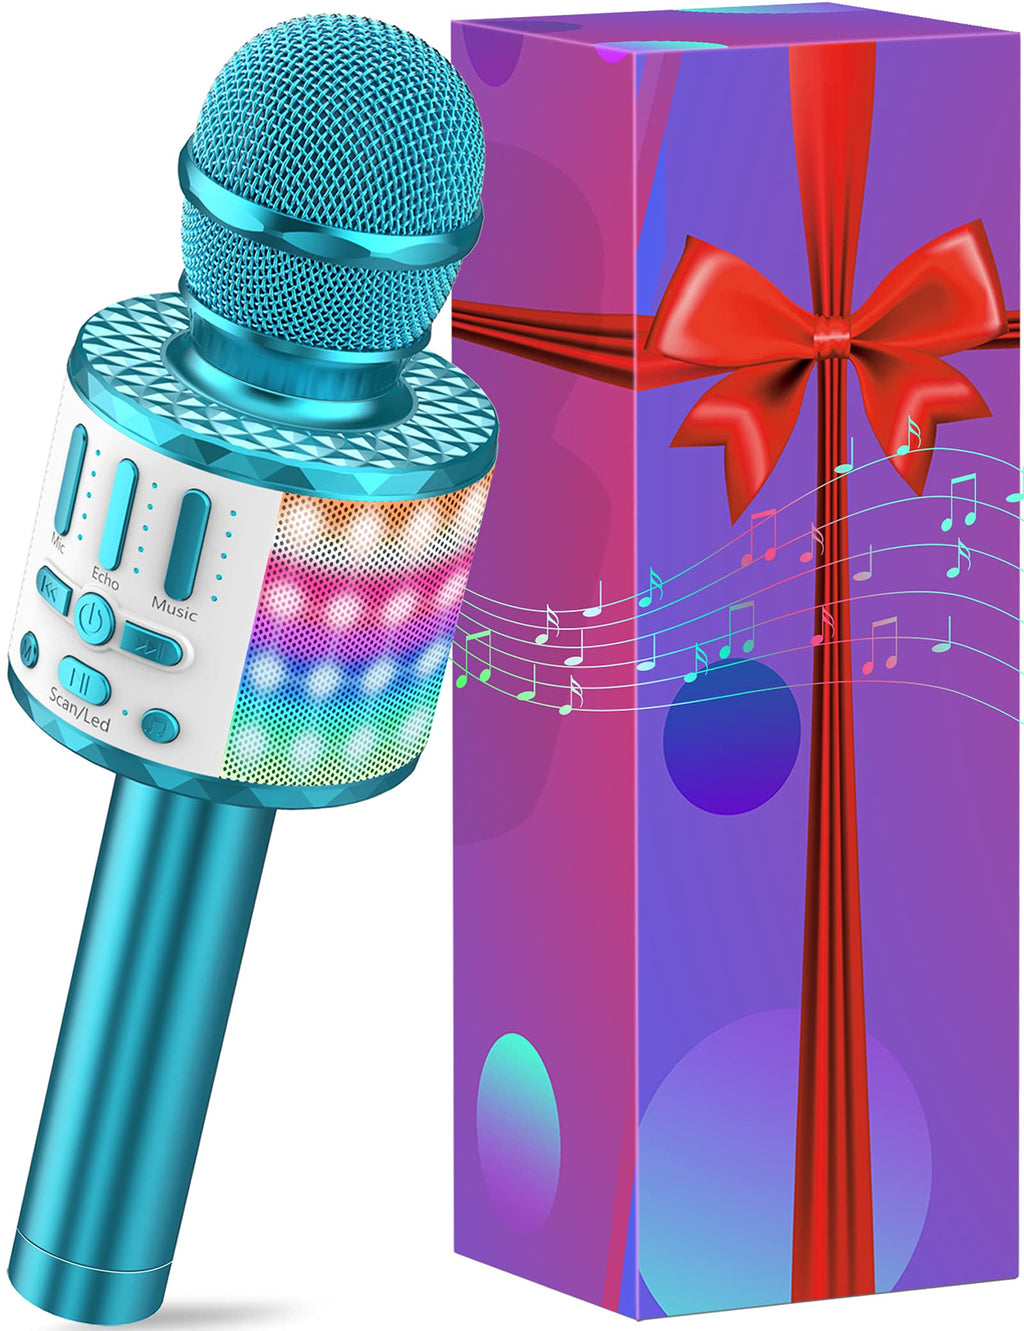 Wireless Karaoke Microphone for Kids, Bluetooth Microphone with LED Lights for Singing, Birthday Gifts Christmas Stocking Toys for 3 4 5 6 7 8 9 10-14 Year Old Boys Girls Blue